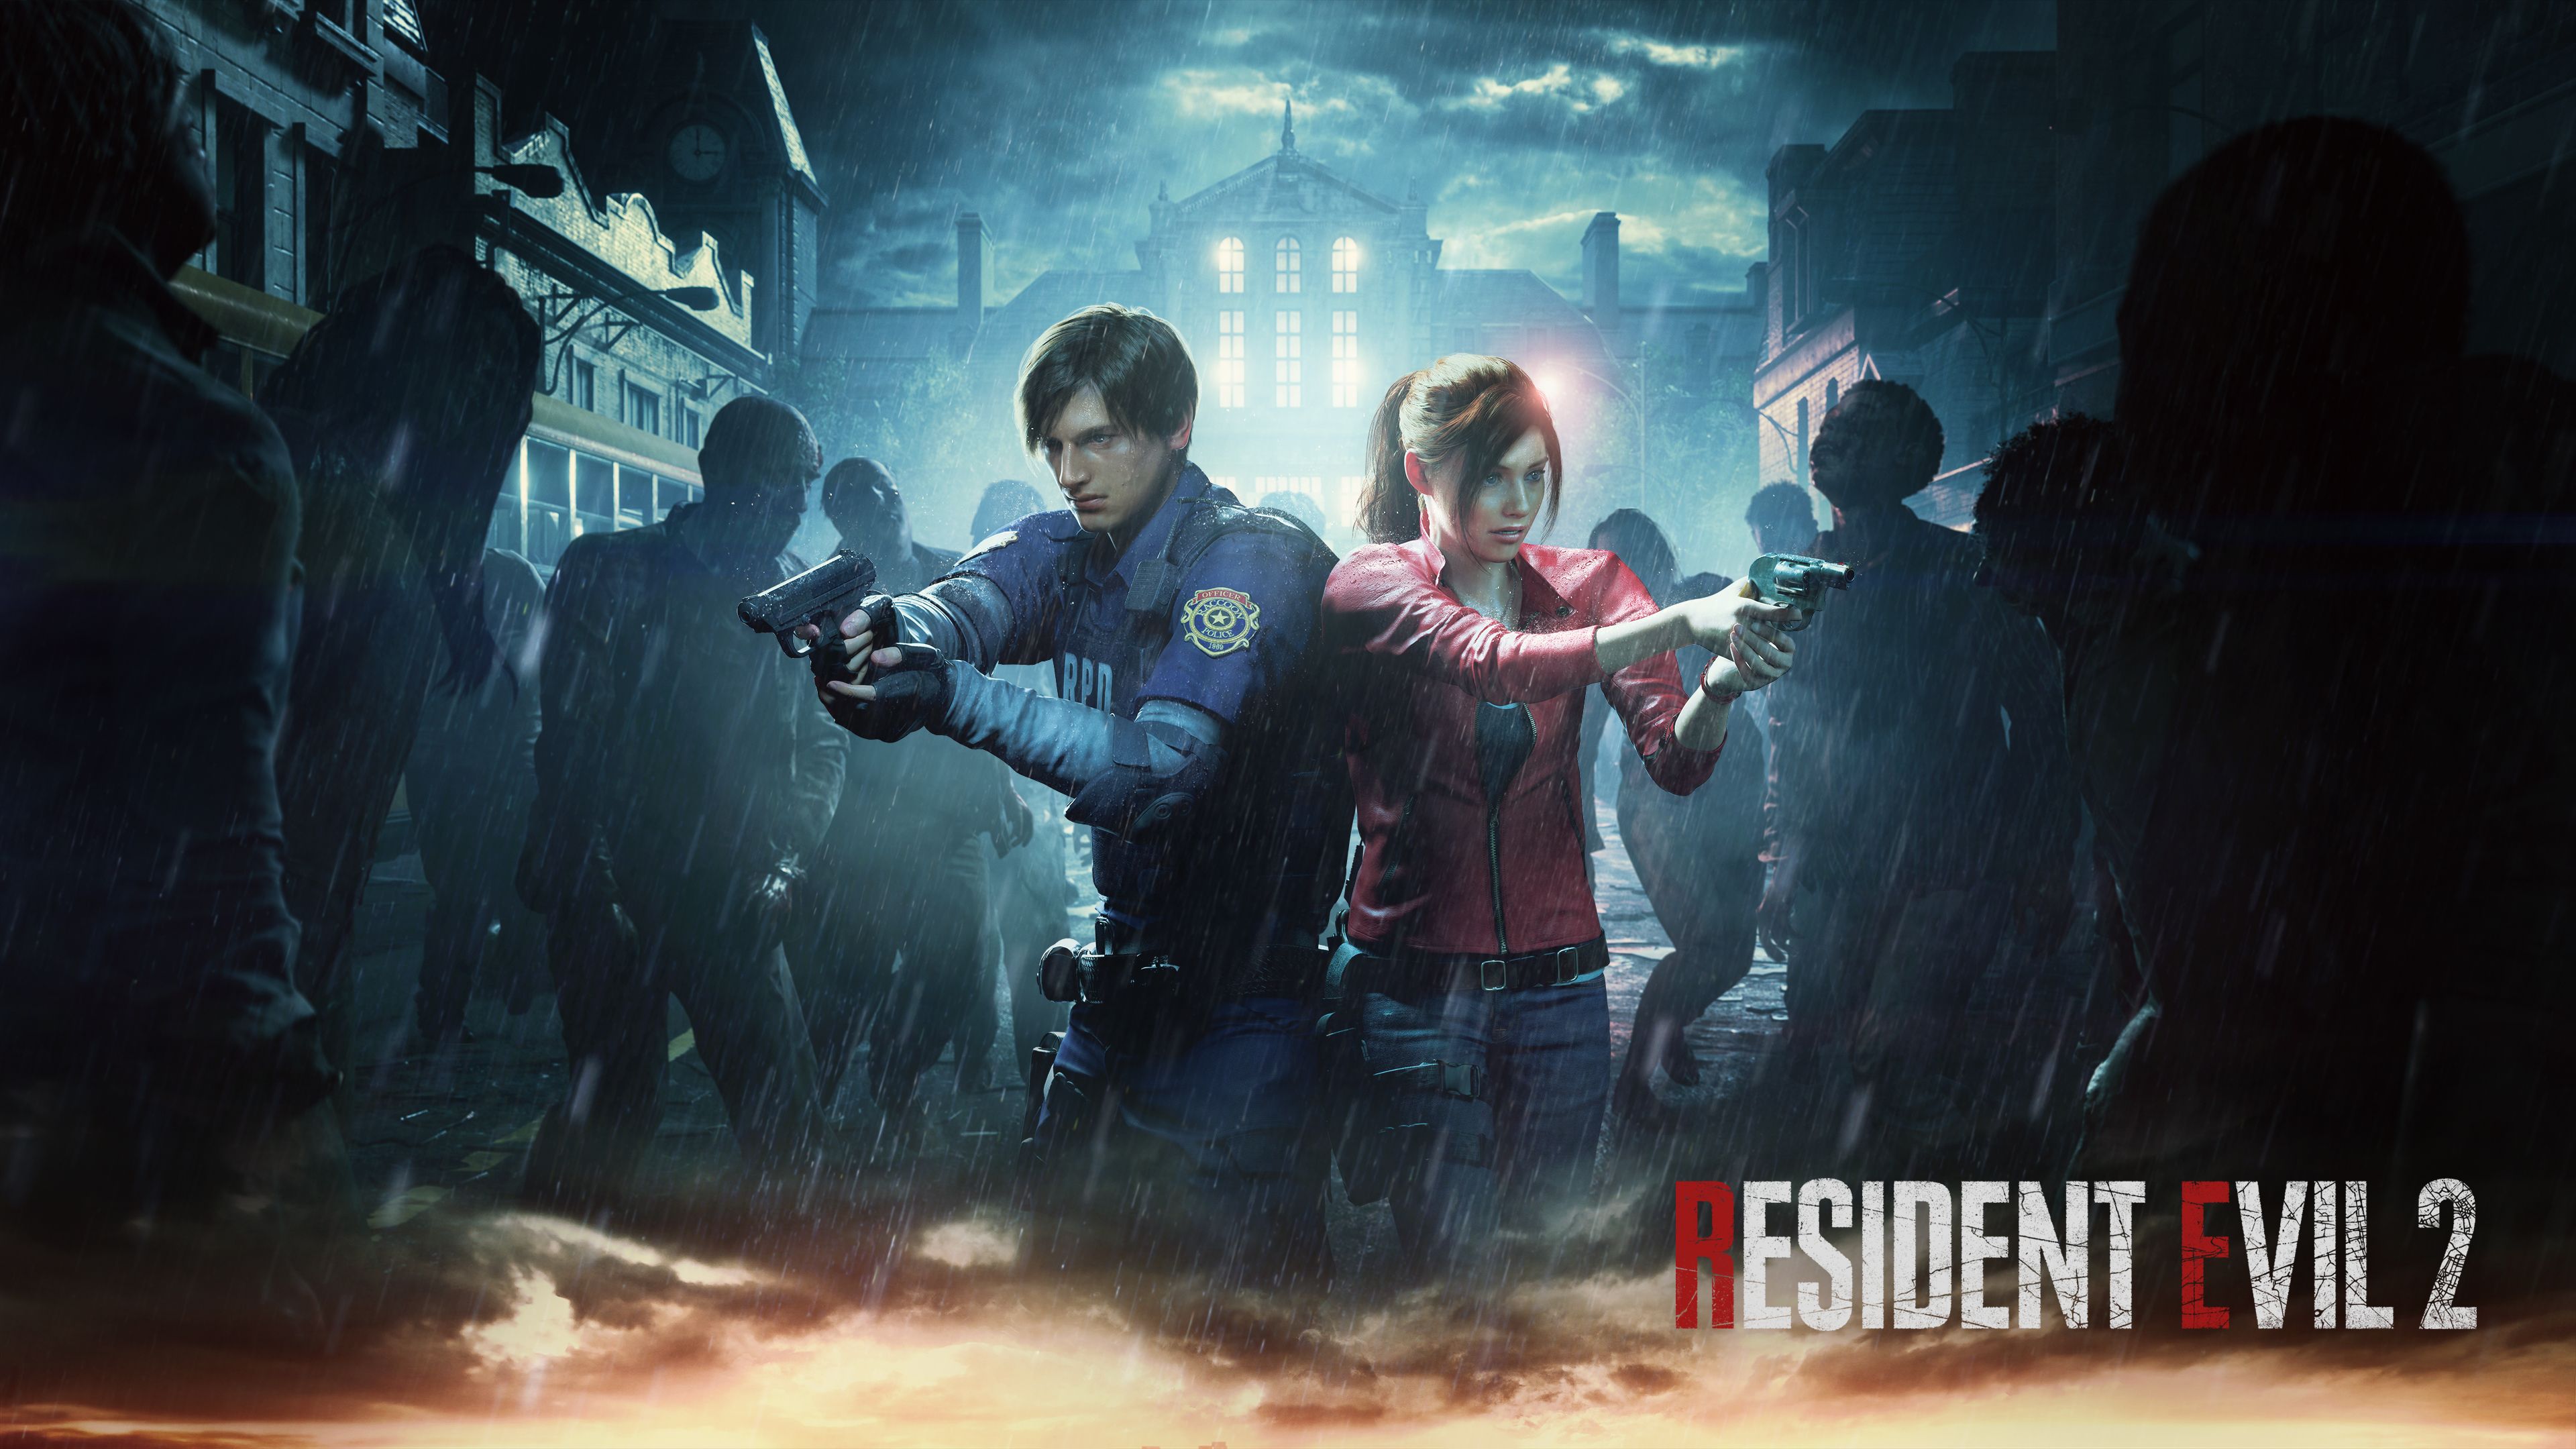 resident evil 2 (2019), leon s kennedy, video game, claire redfield, resident evil